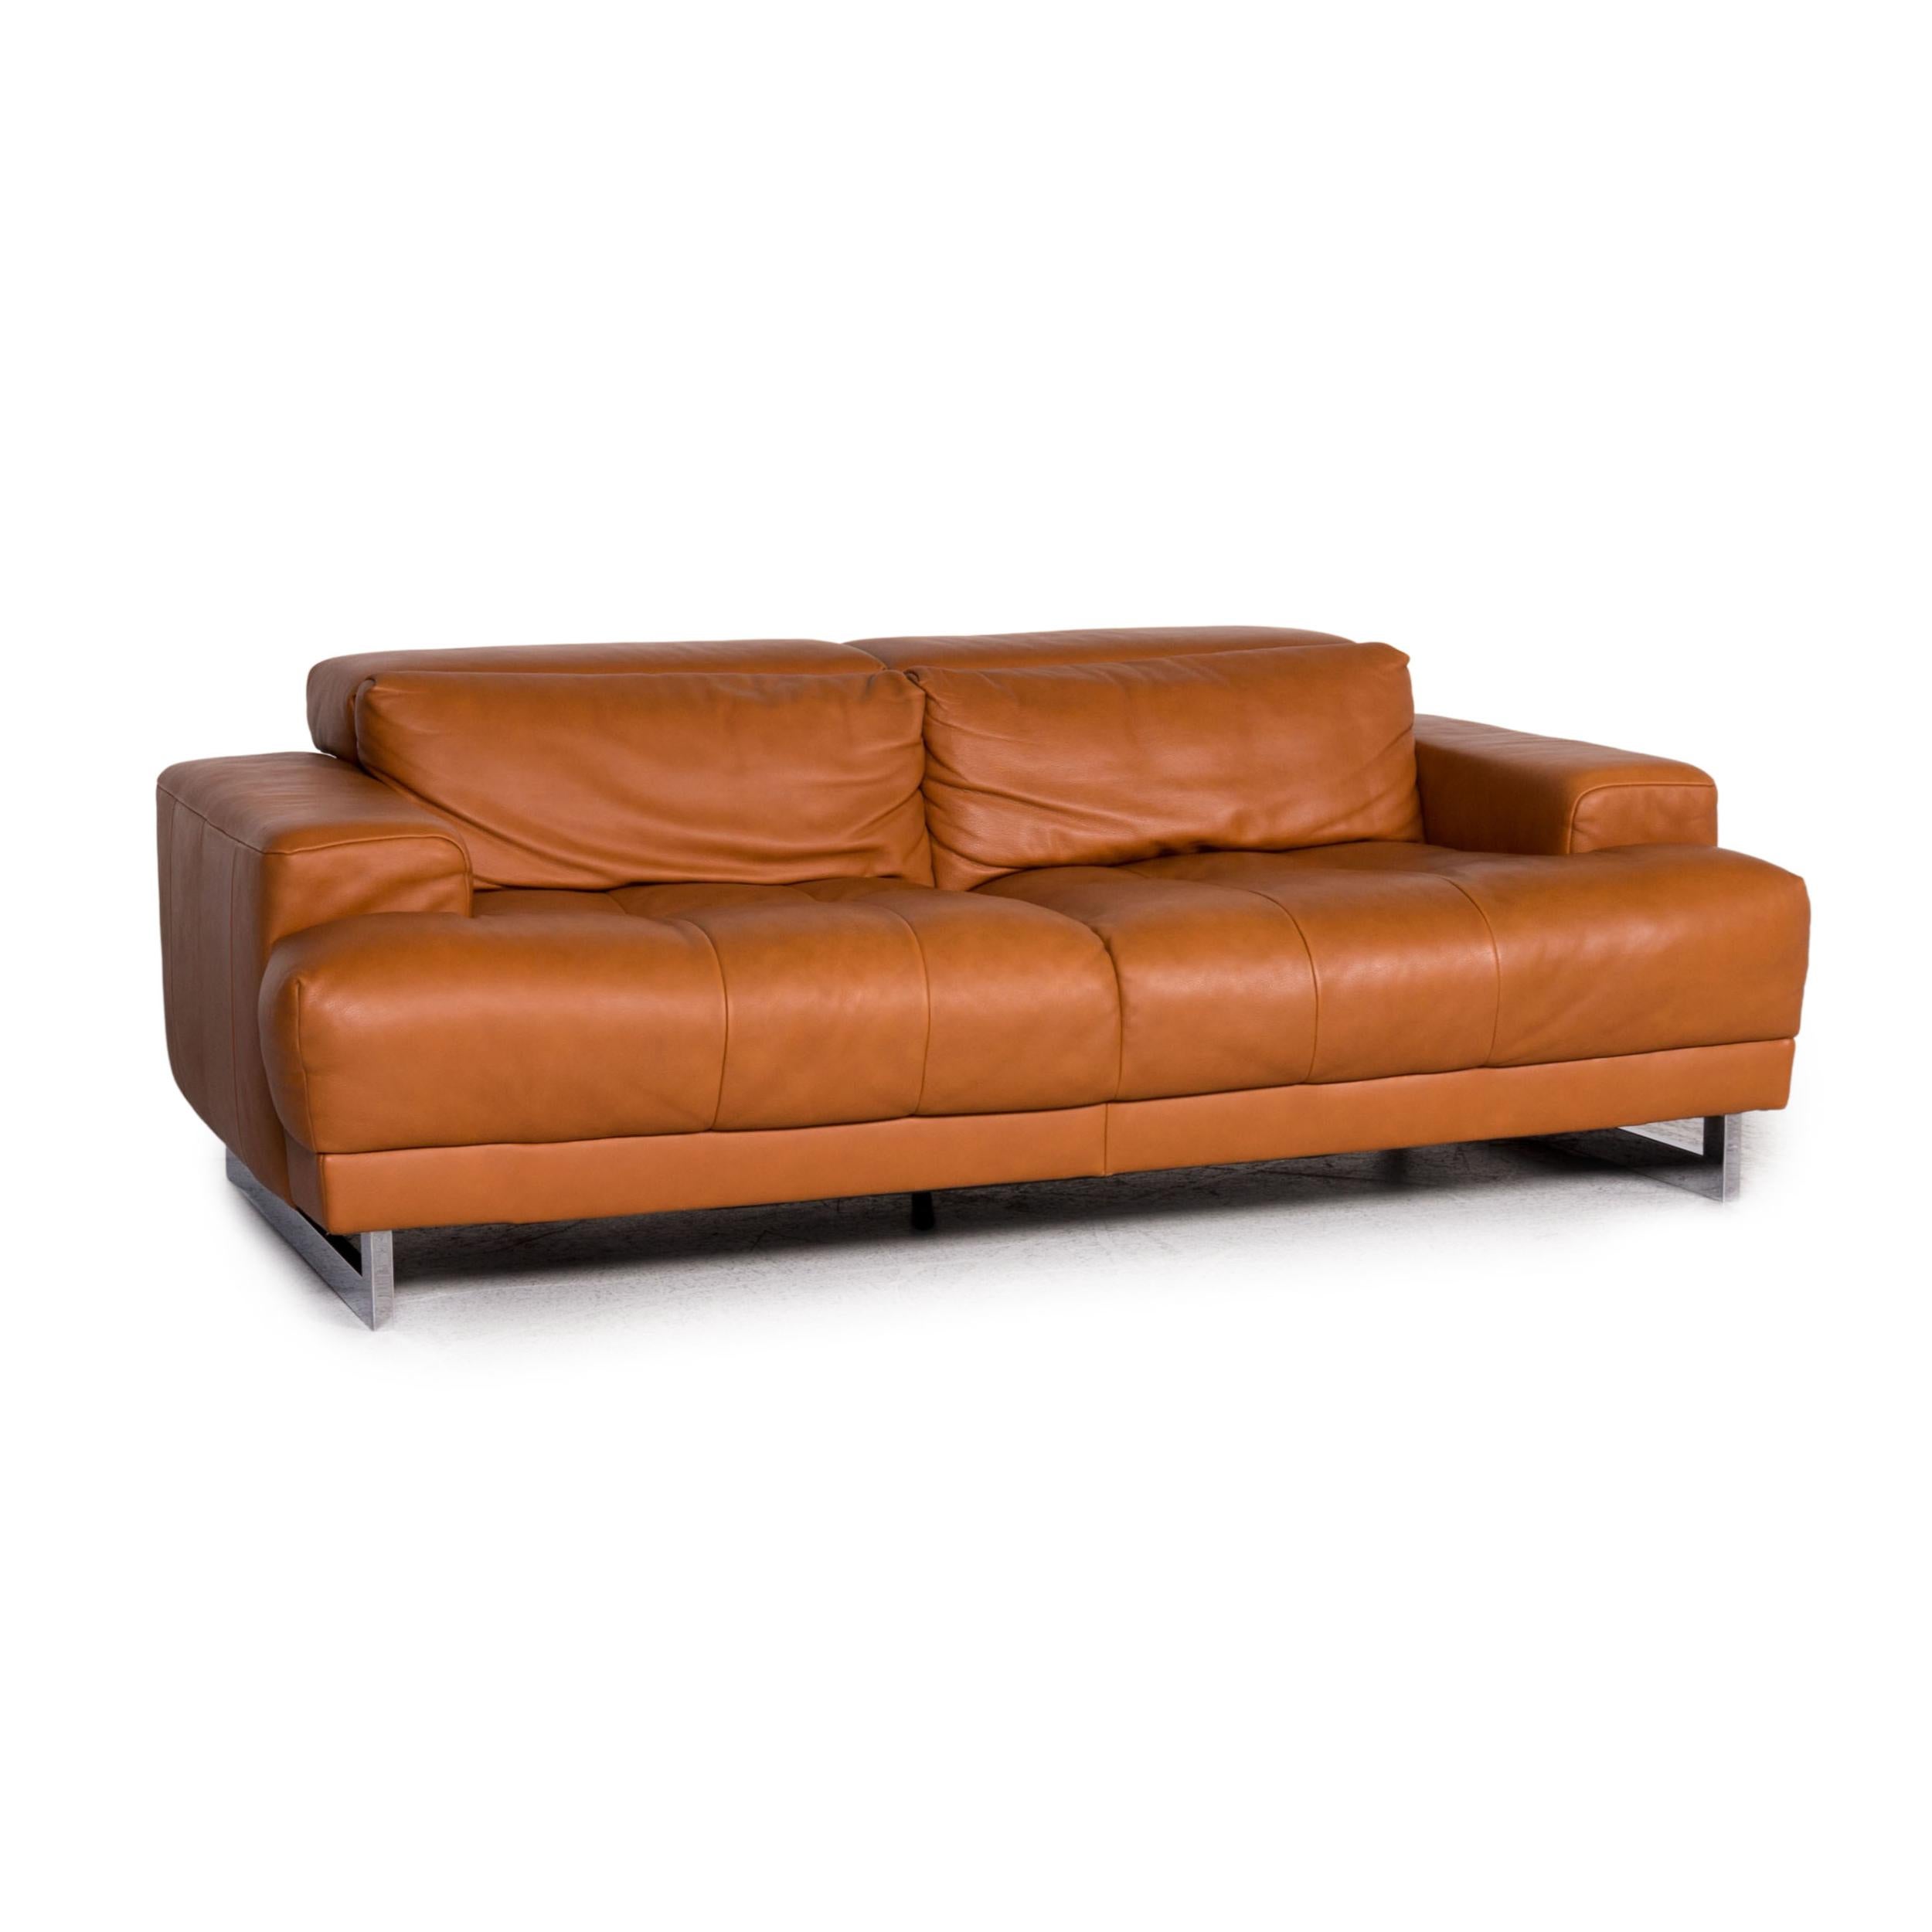 Contemporary Ewald Schillig Leather Sofa Brown Cognac Three-Seater Couch For Sale